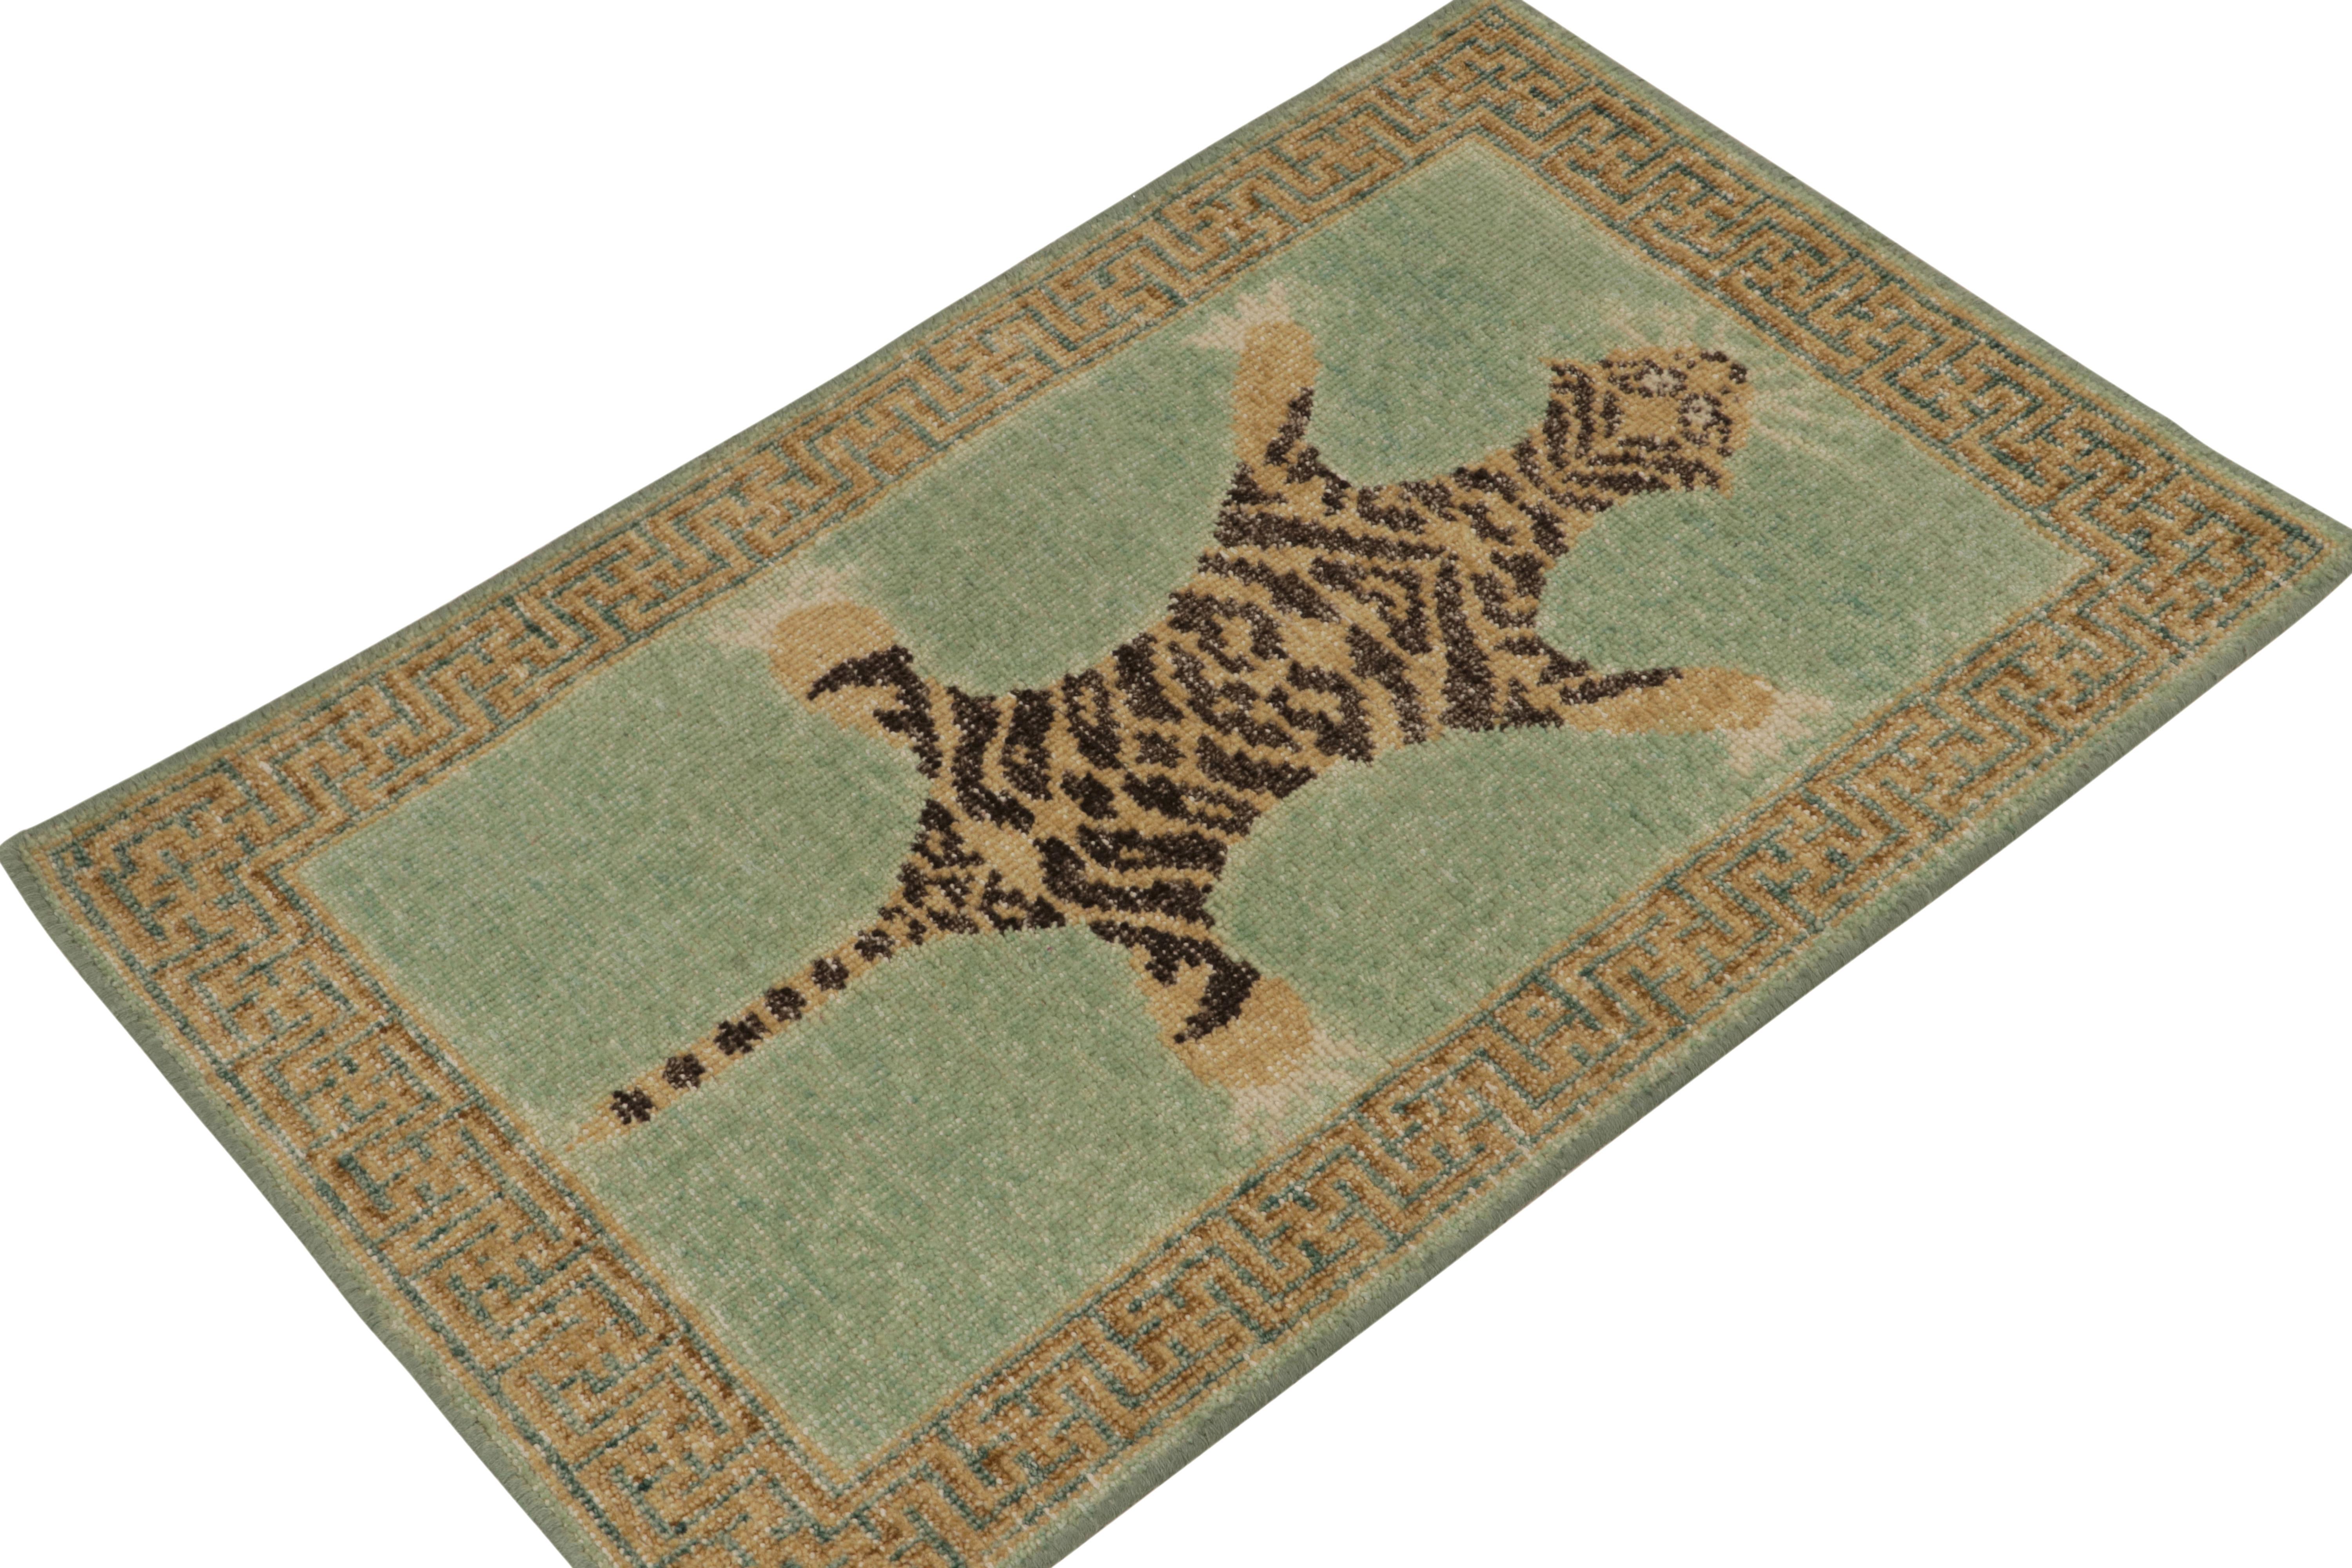 From Rug & Kilim’s Homage Collection, a 2x3 hand-knotted wool piece recapturing the time-honored Tiger skin rug in its glory. 

On the Design: This piece is inspired by antique Indian Tiger-skin rugs of the most regal, inviting presence. Tones of